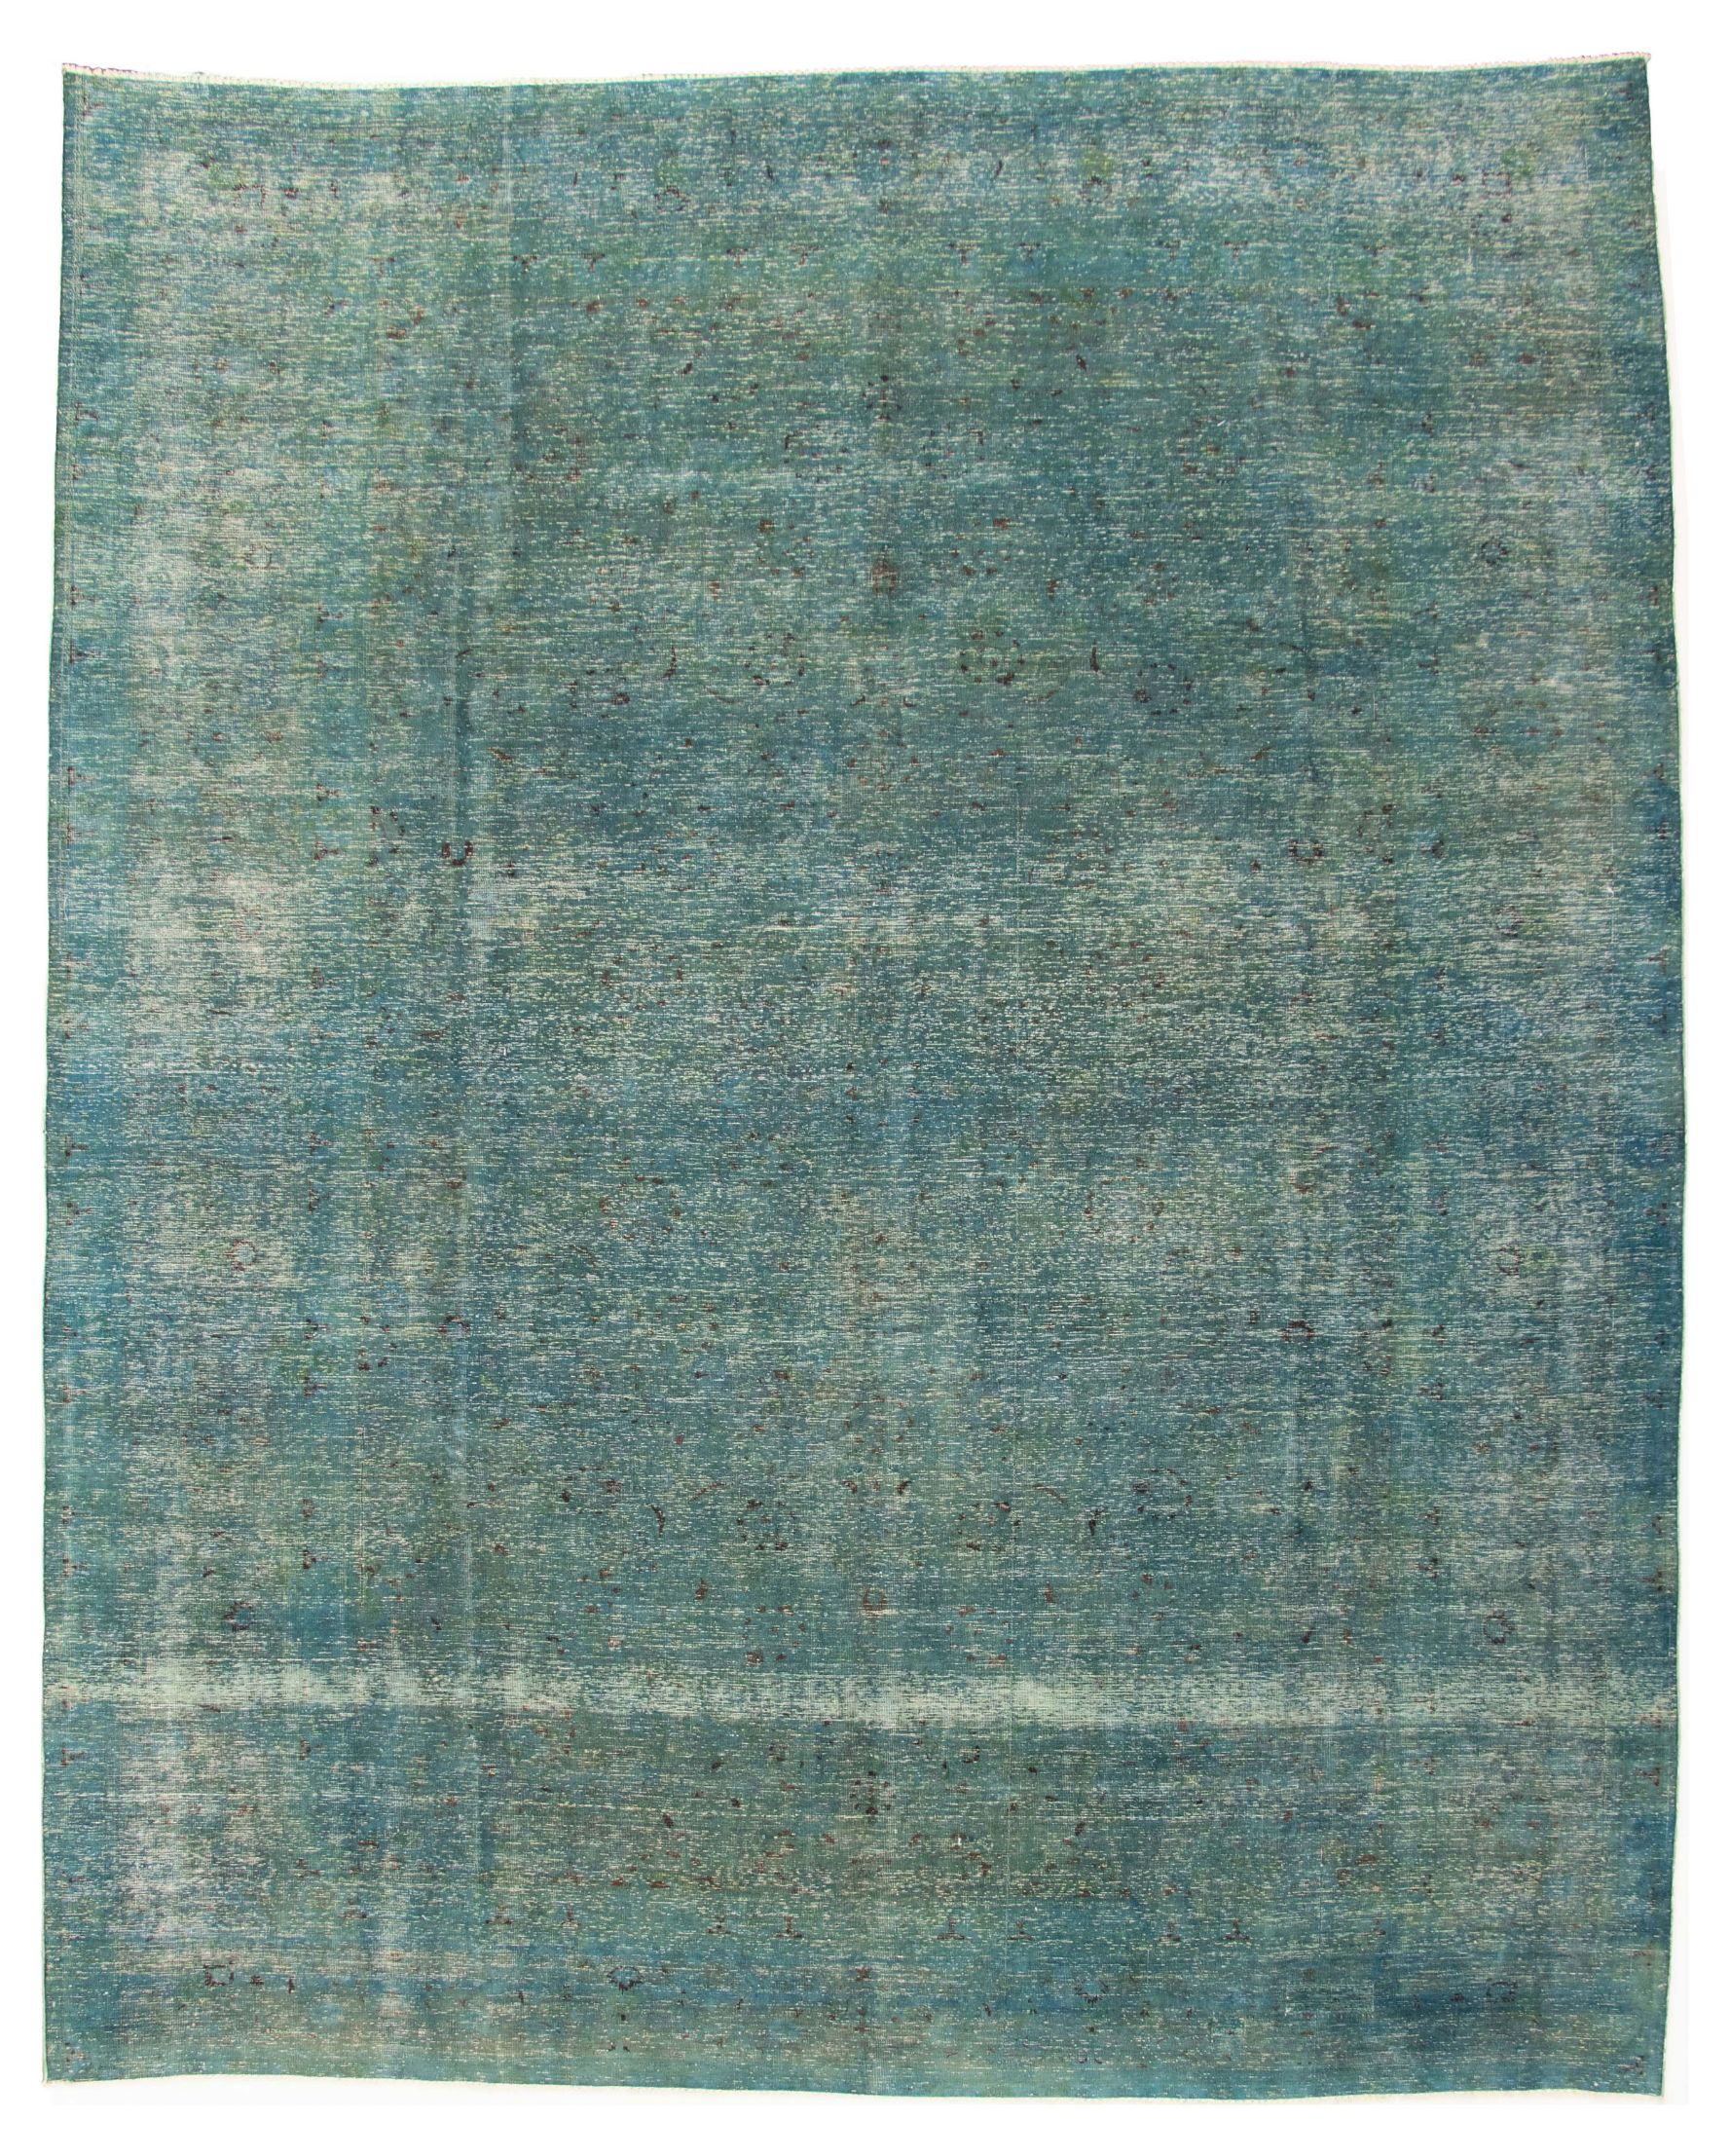 Hand-knotted Color Transition Teal Wool Rug 9'10" x 12'1" Size: 9'10" x 12'1"  